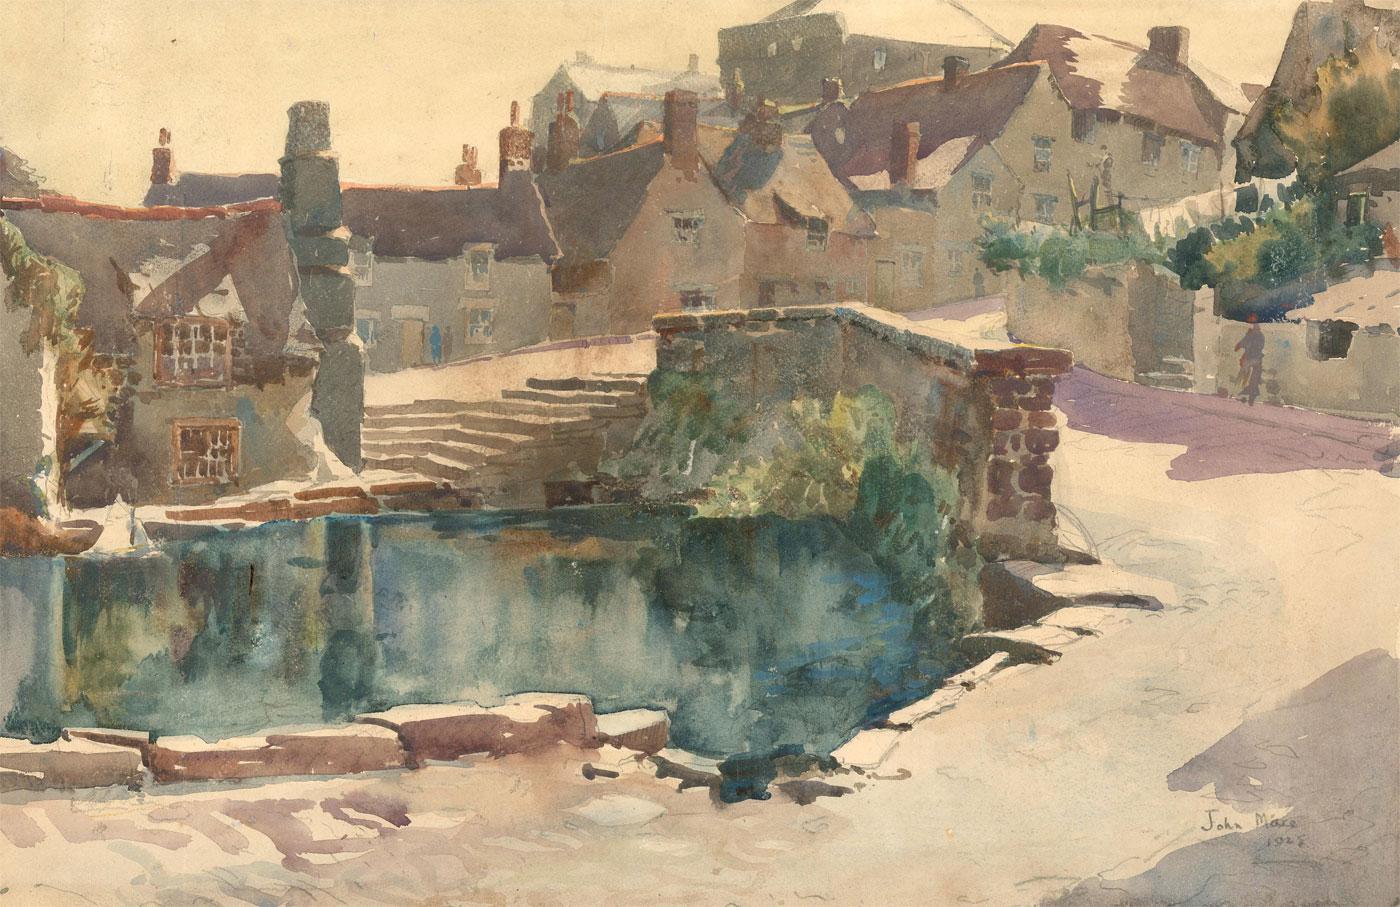 A delightful study of The Mill pond, Swanage by the British artist John Mace. Signed and dated. On watercolour paper.
